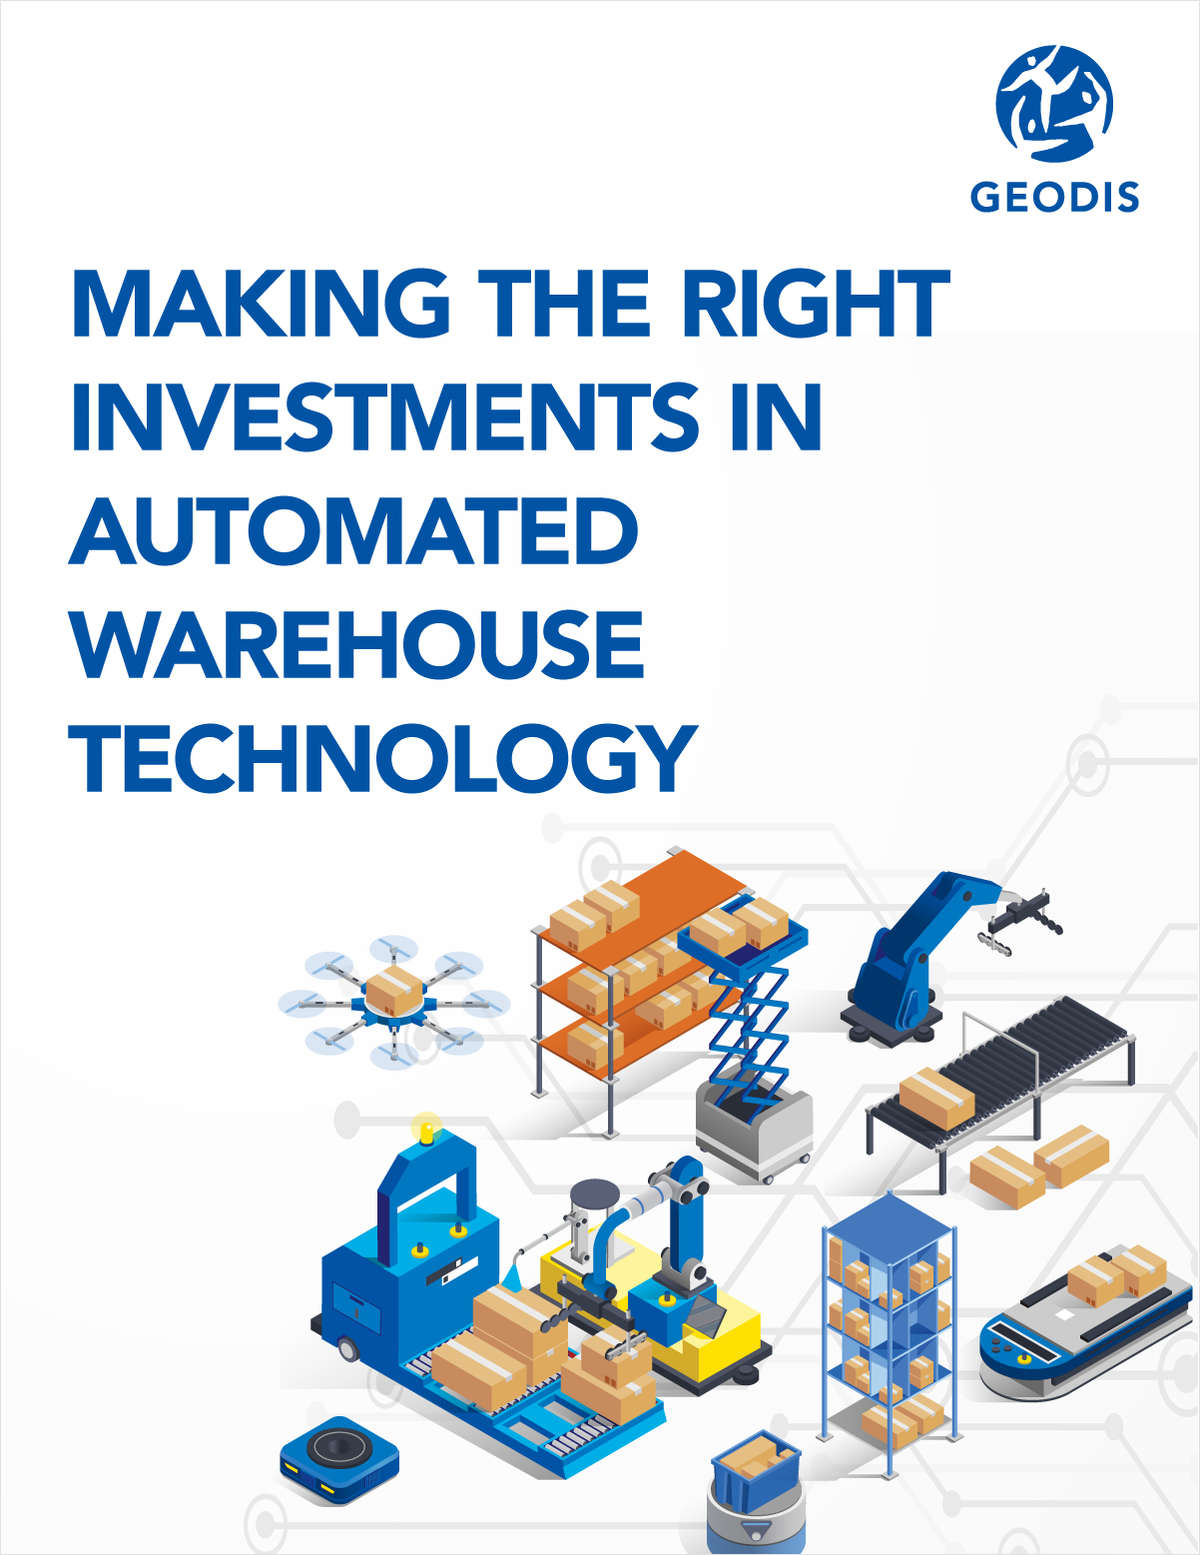 Making the Right Investments in Automated Warehouse Technology